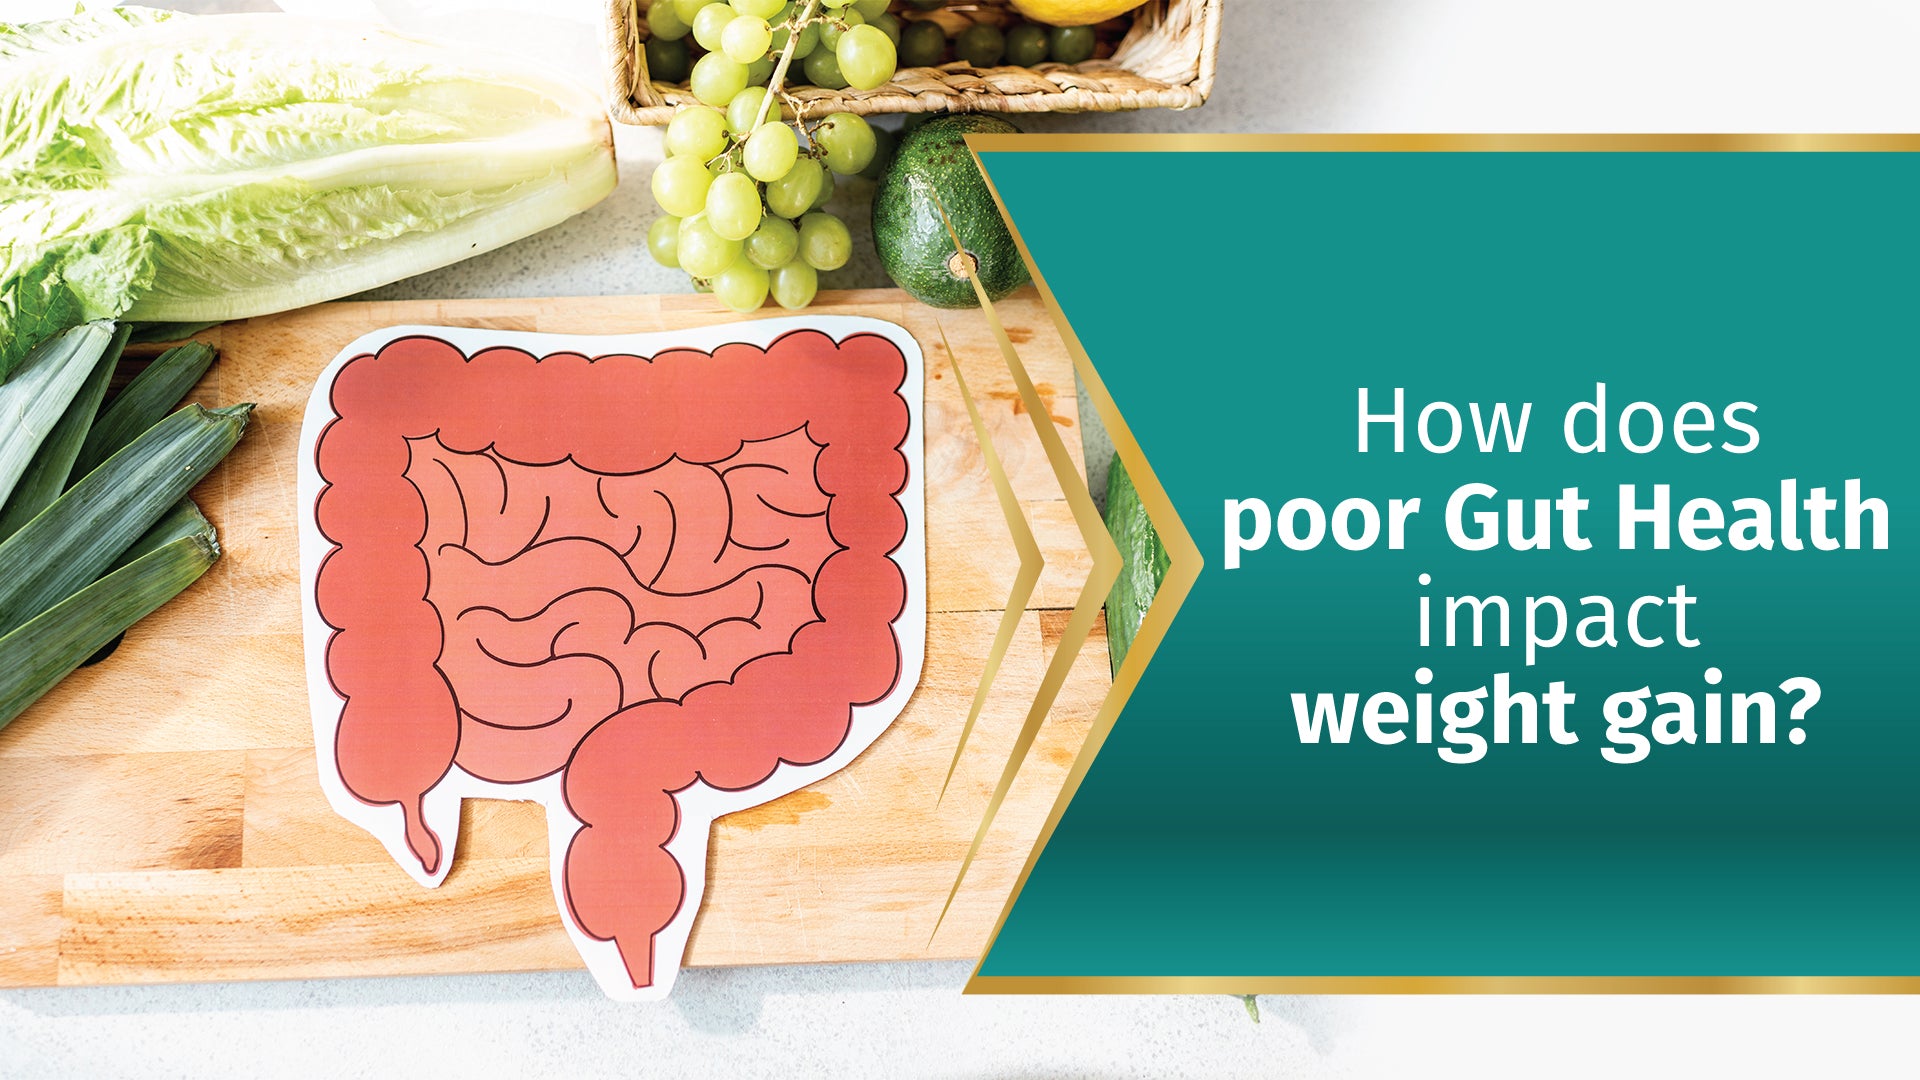 How does Poor Gut Health impact weight gain?